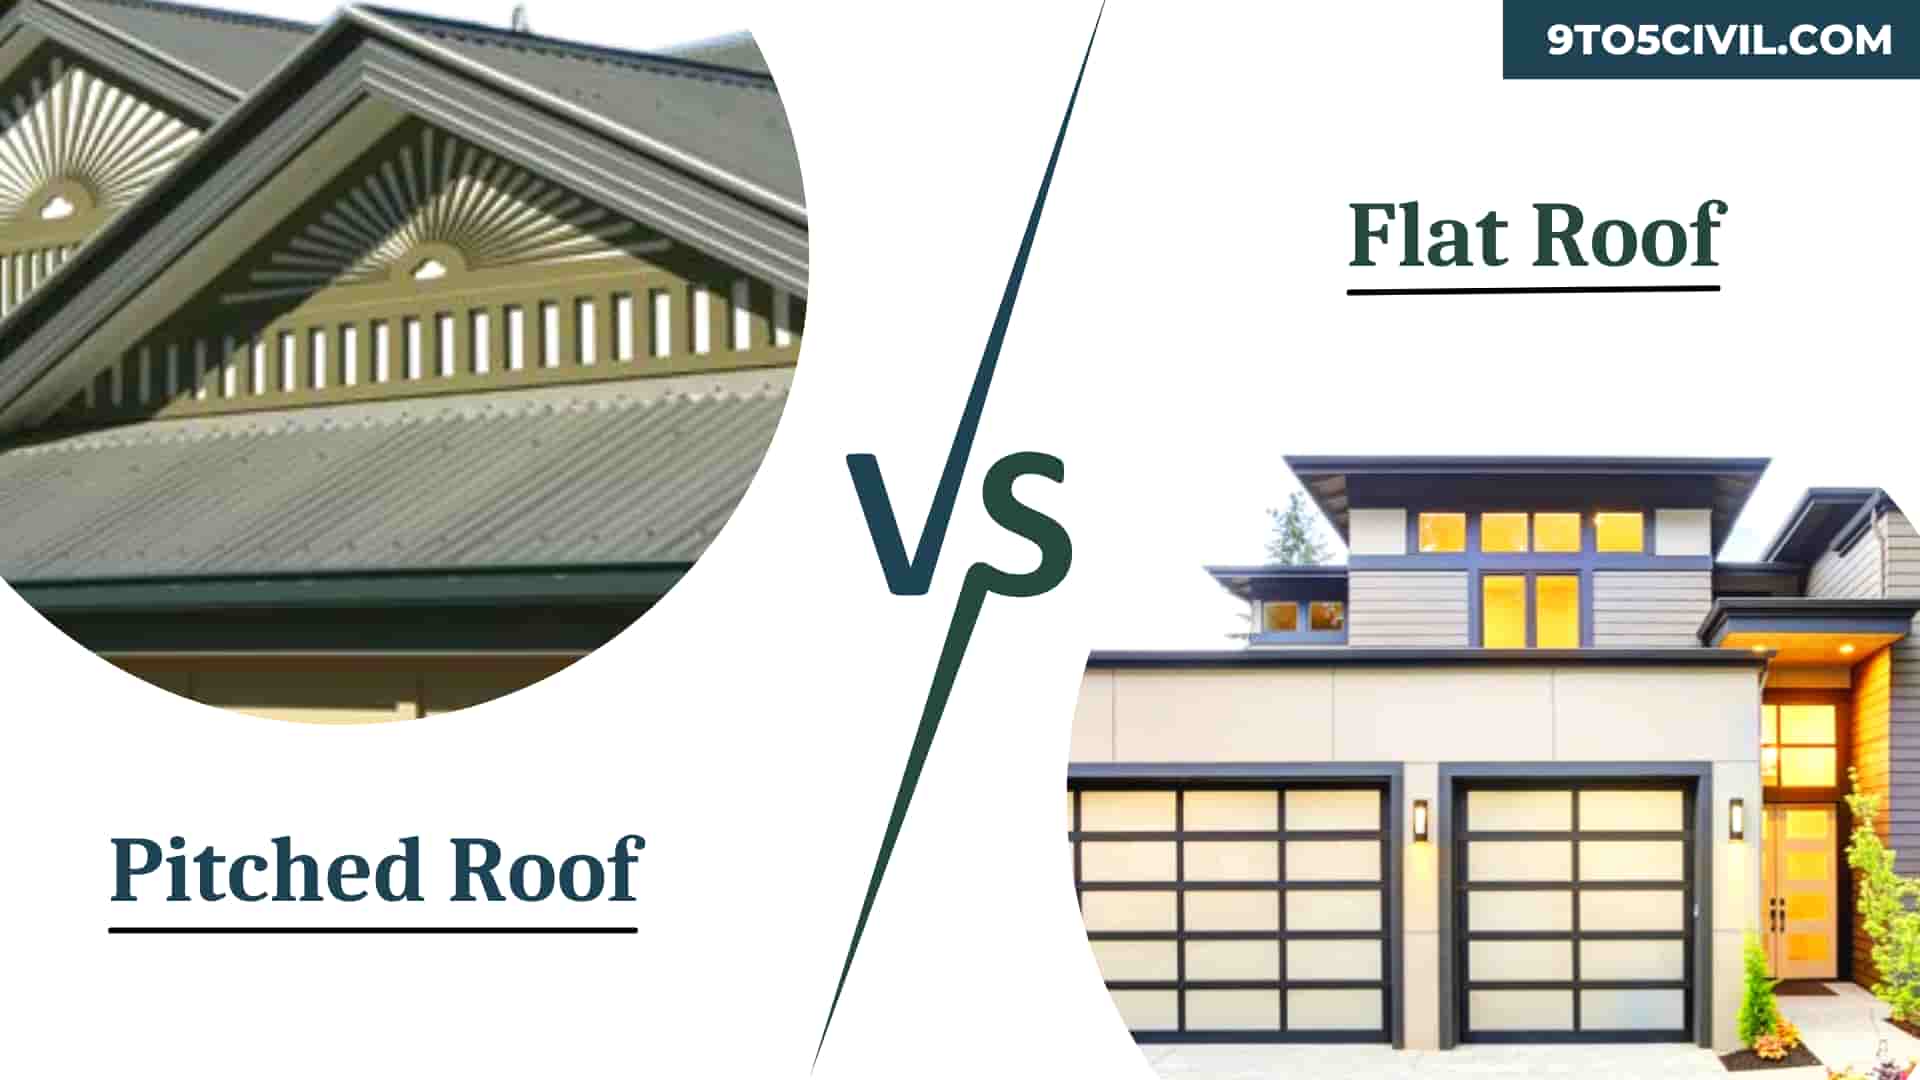 Flat roof Vs Pitched roof